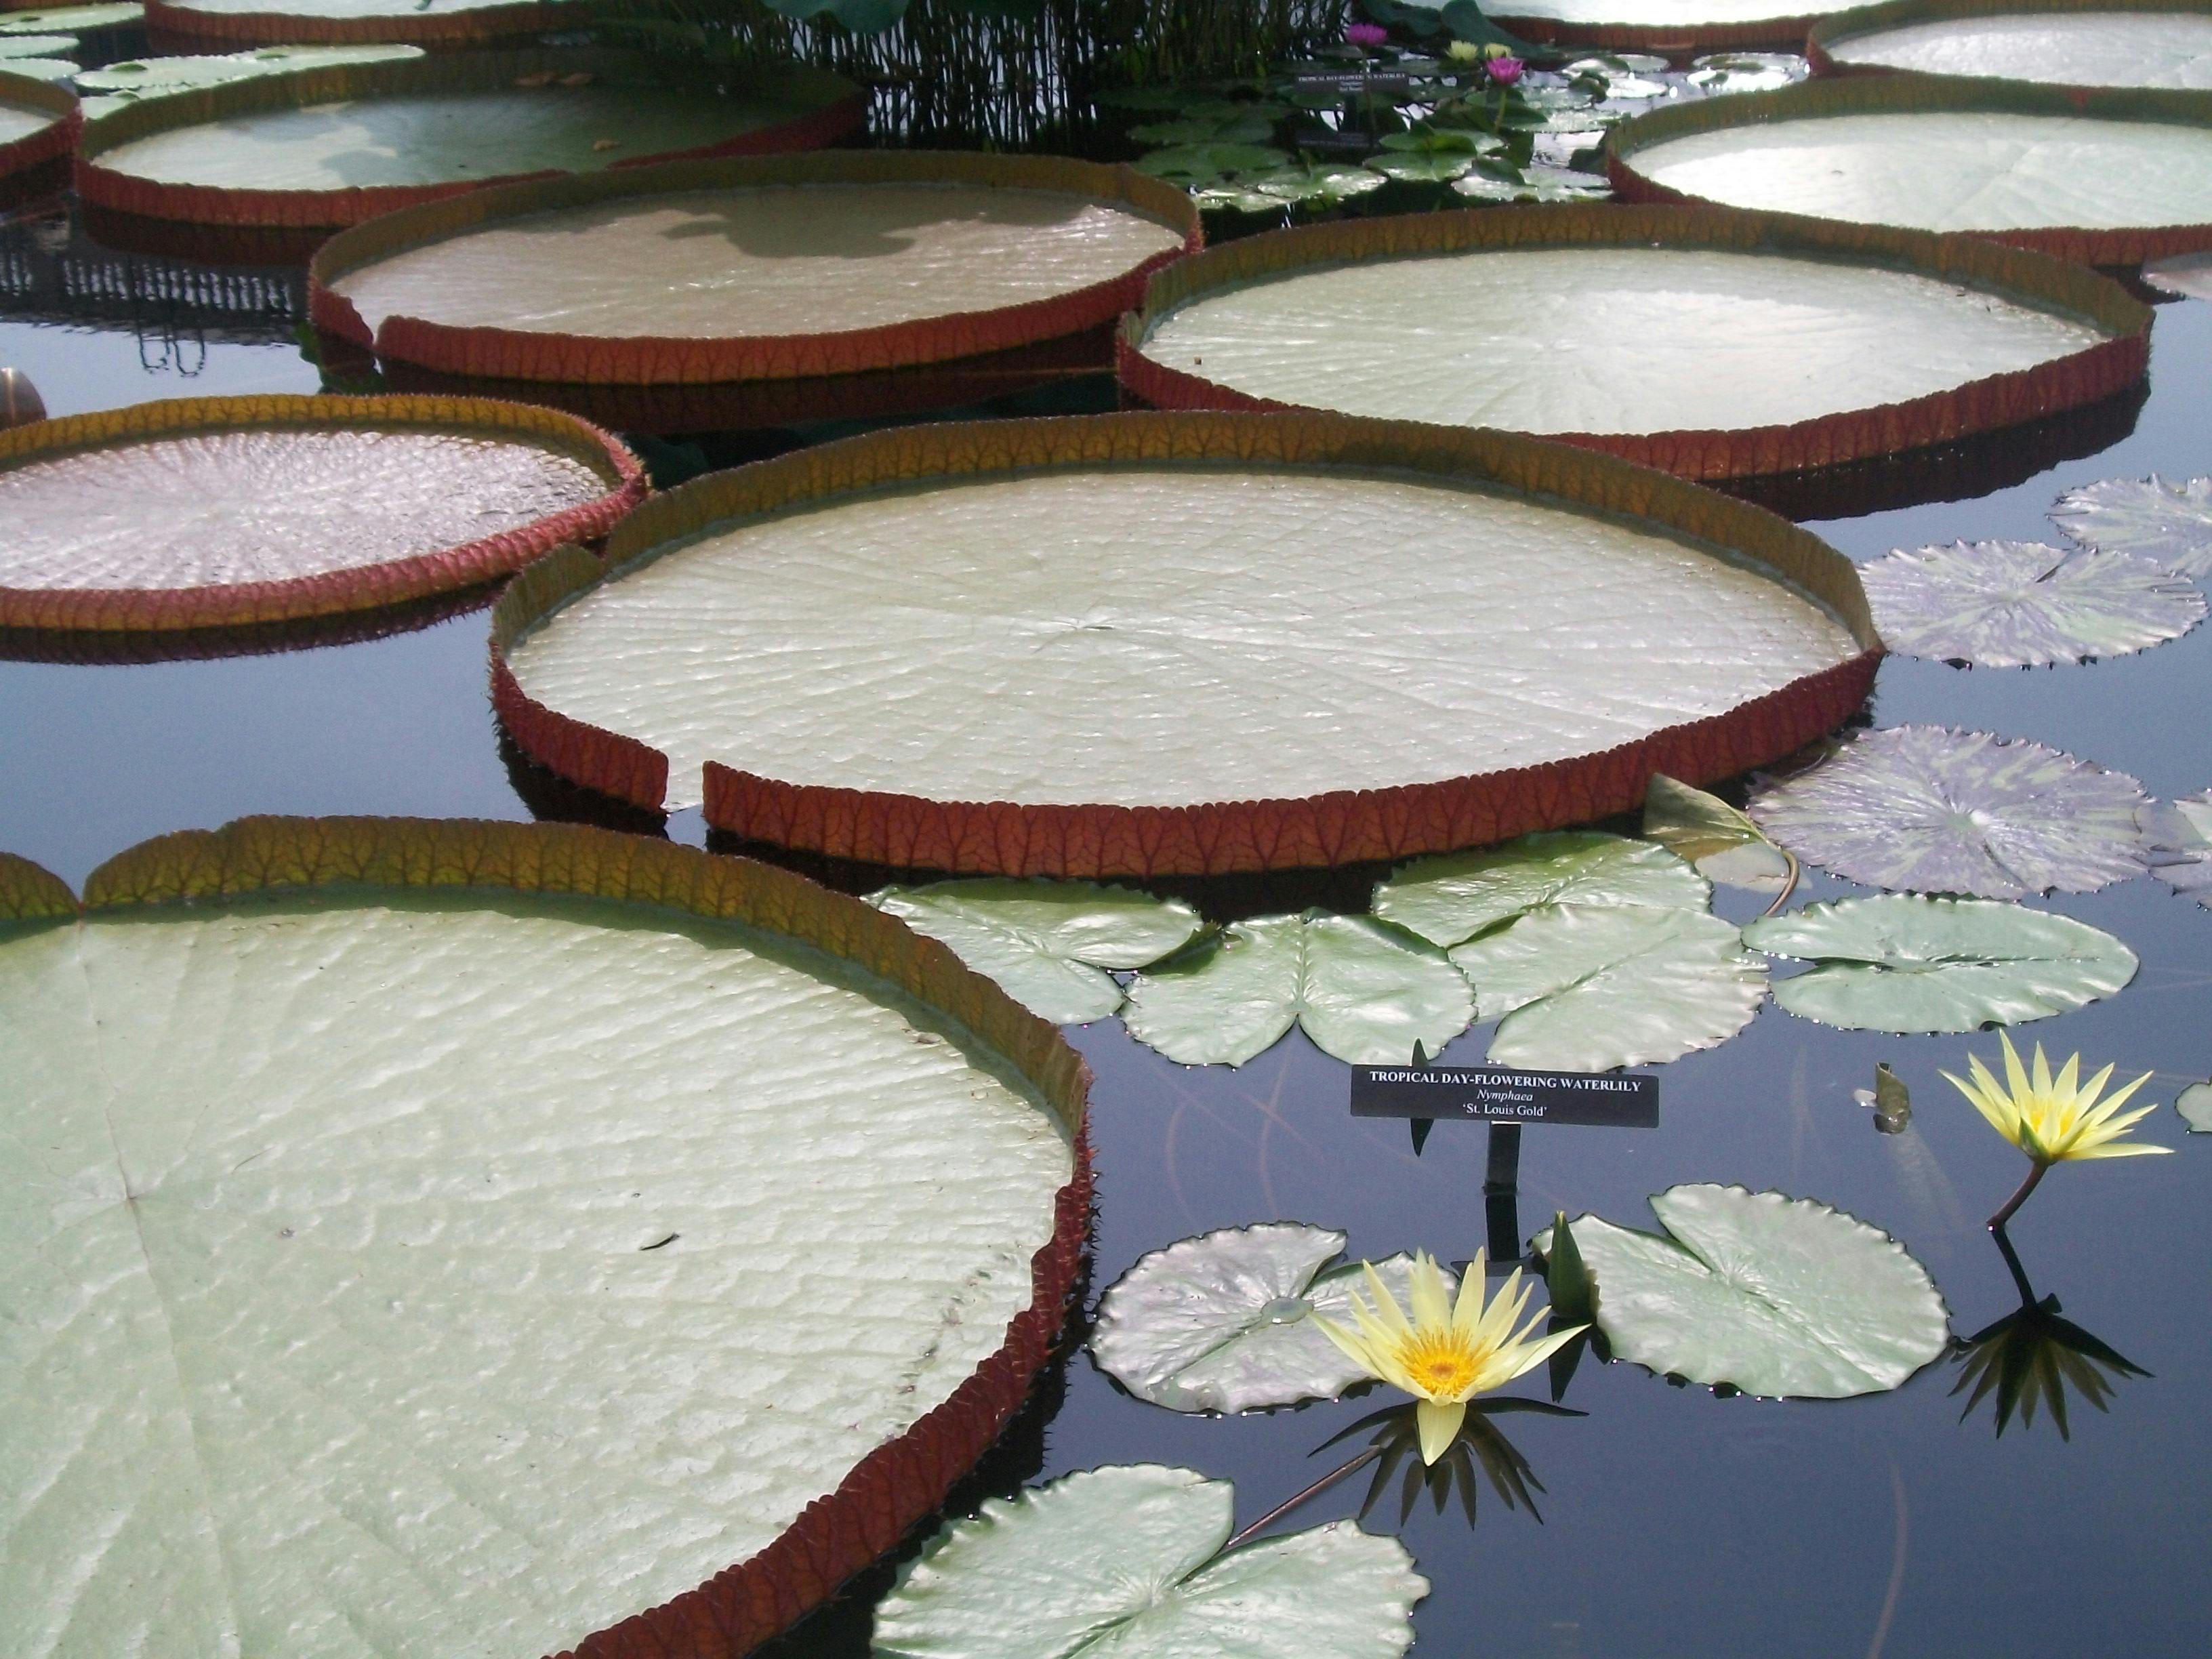 Free stock photo of giant lily pad like plants